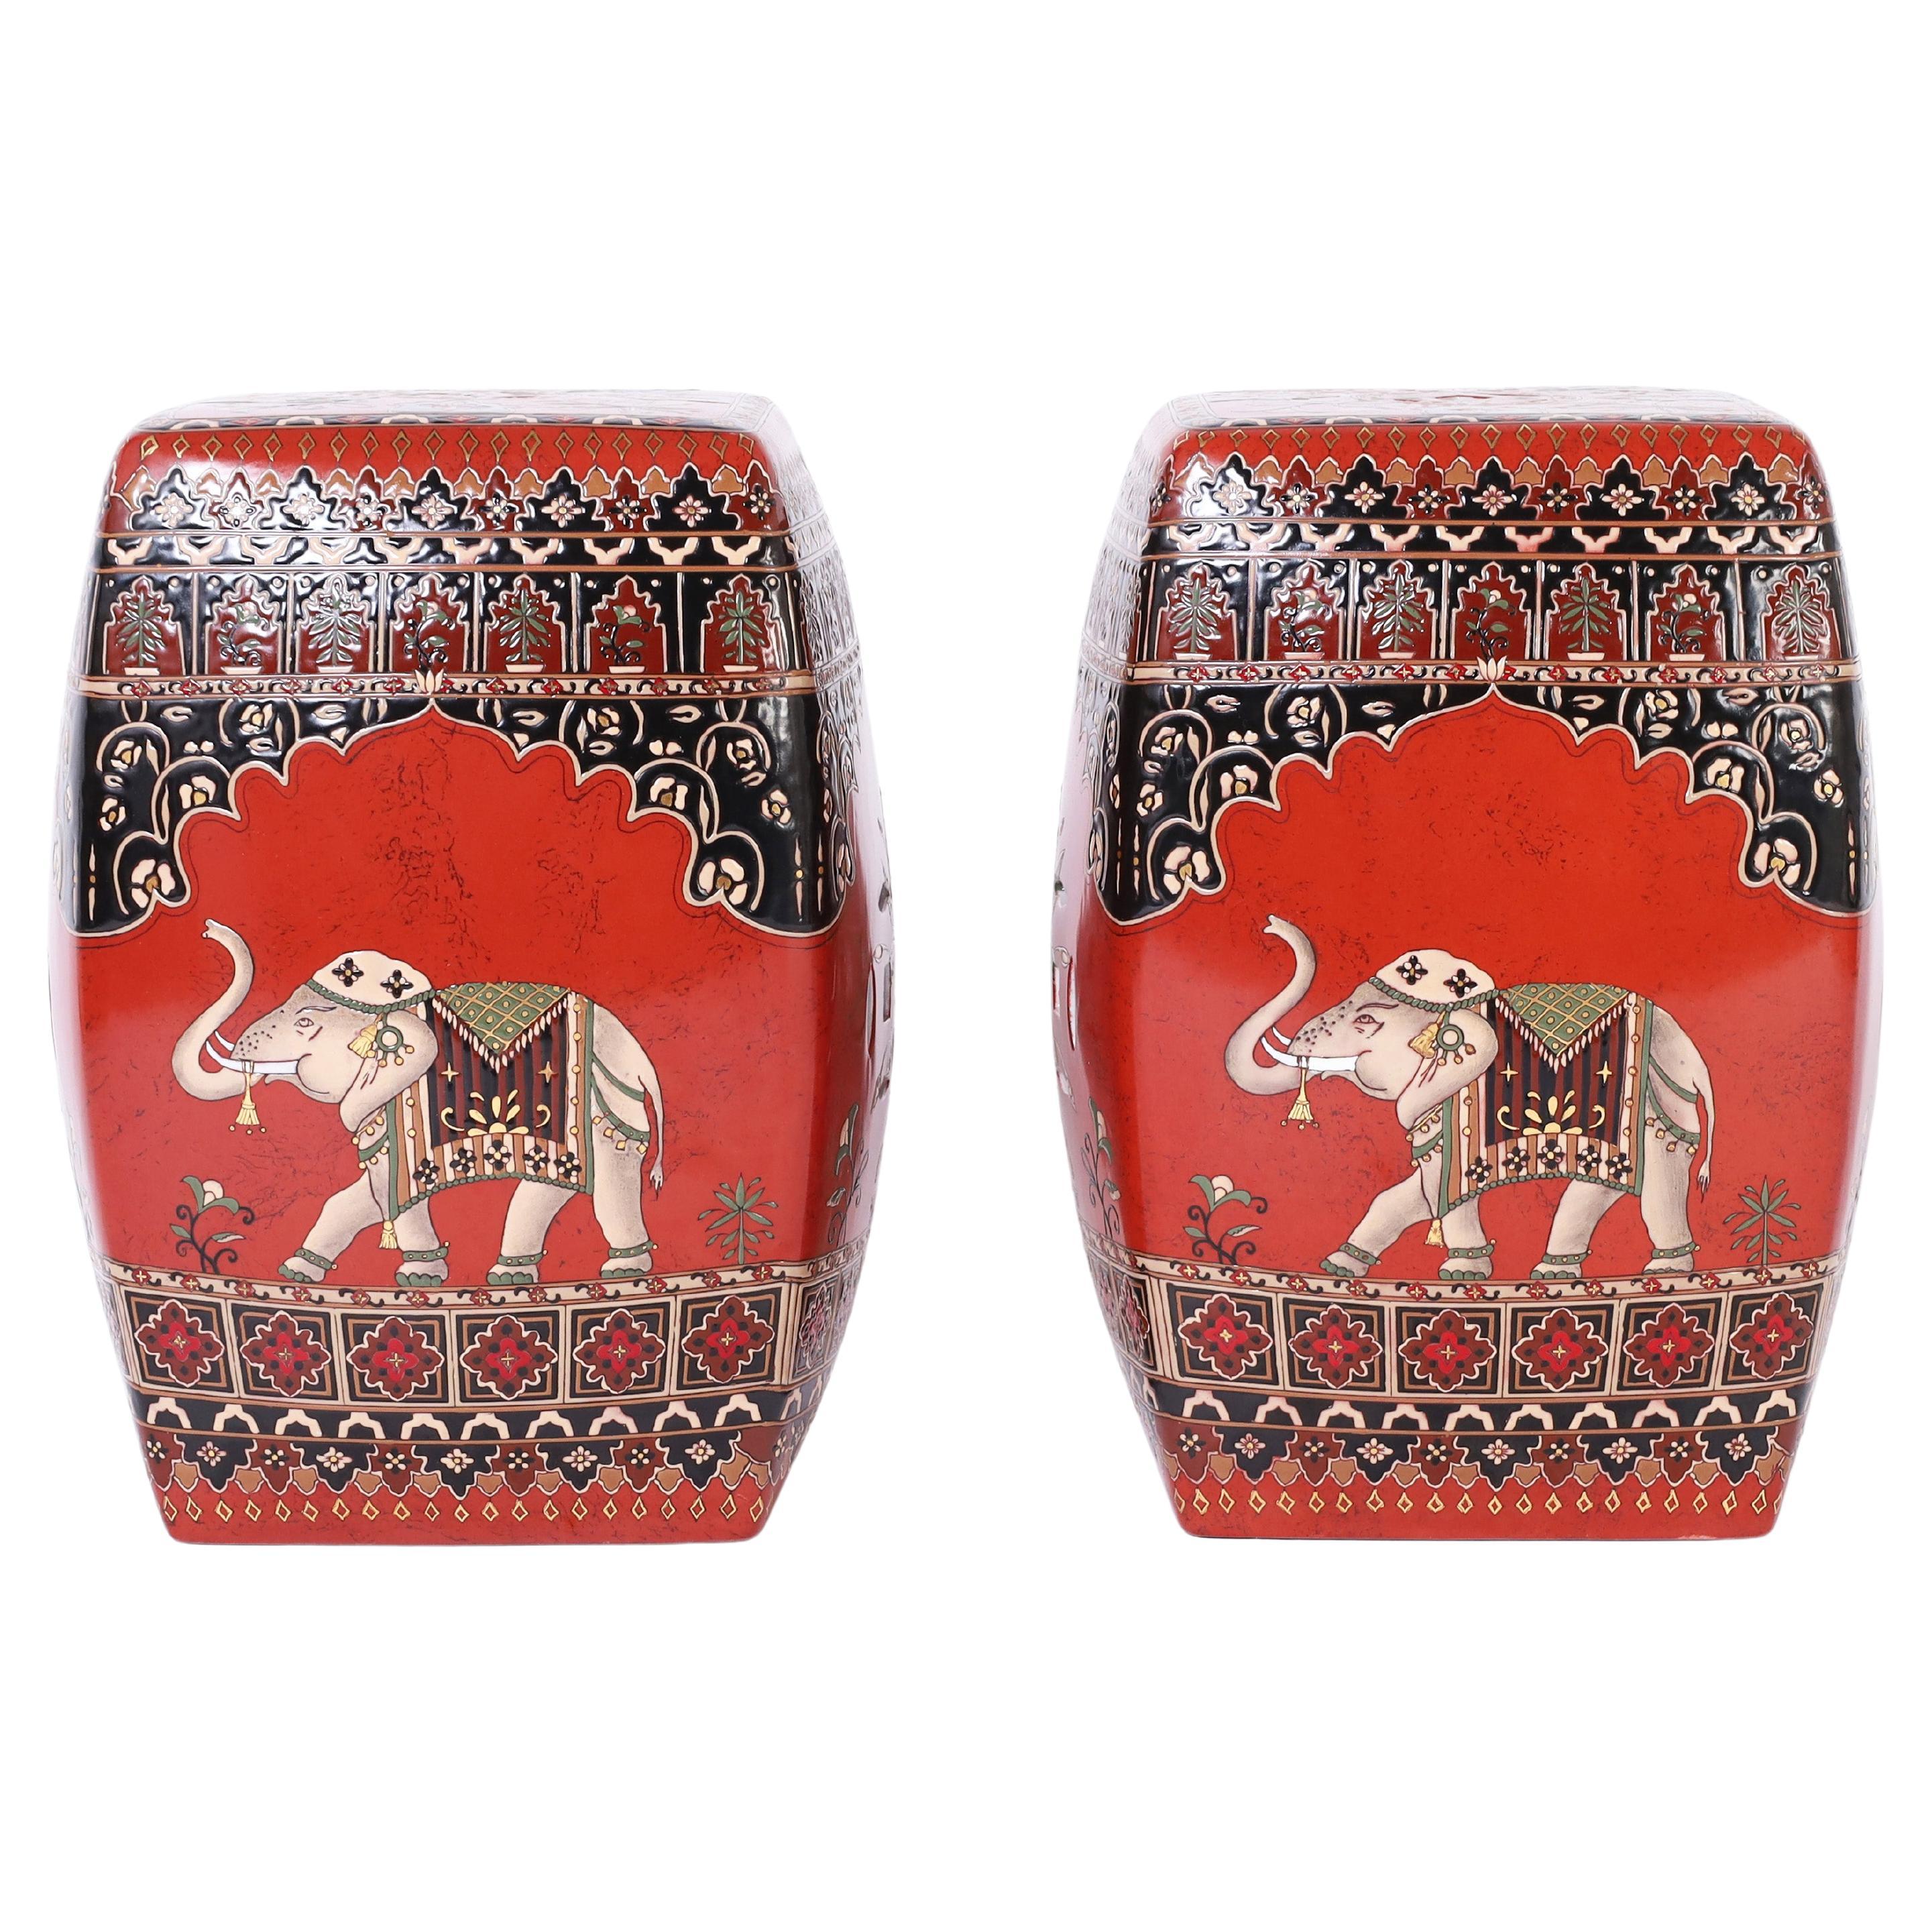 Pair of Chinese Terra Cotta Garden Seats with Elephants and Flowers For Sale